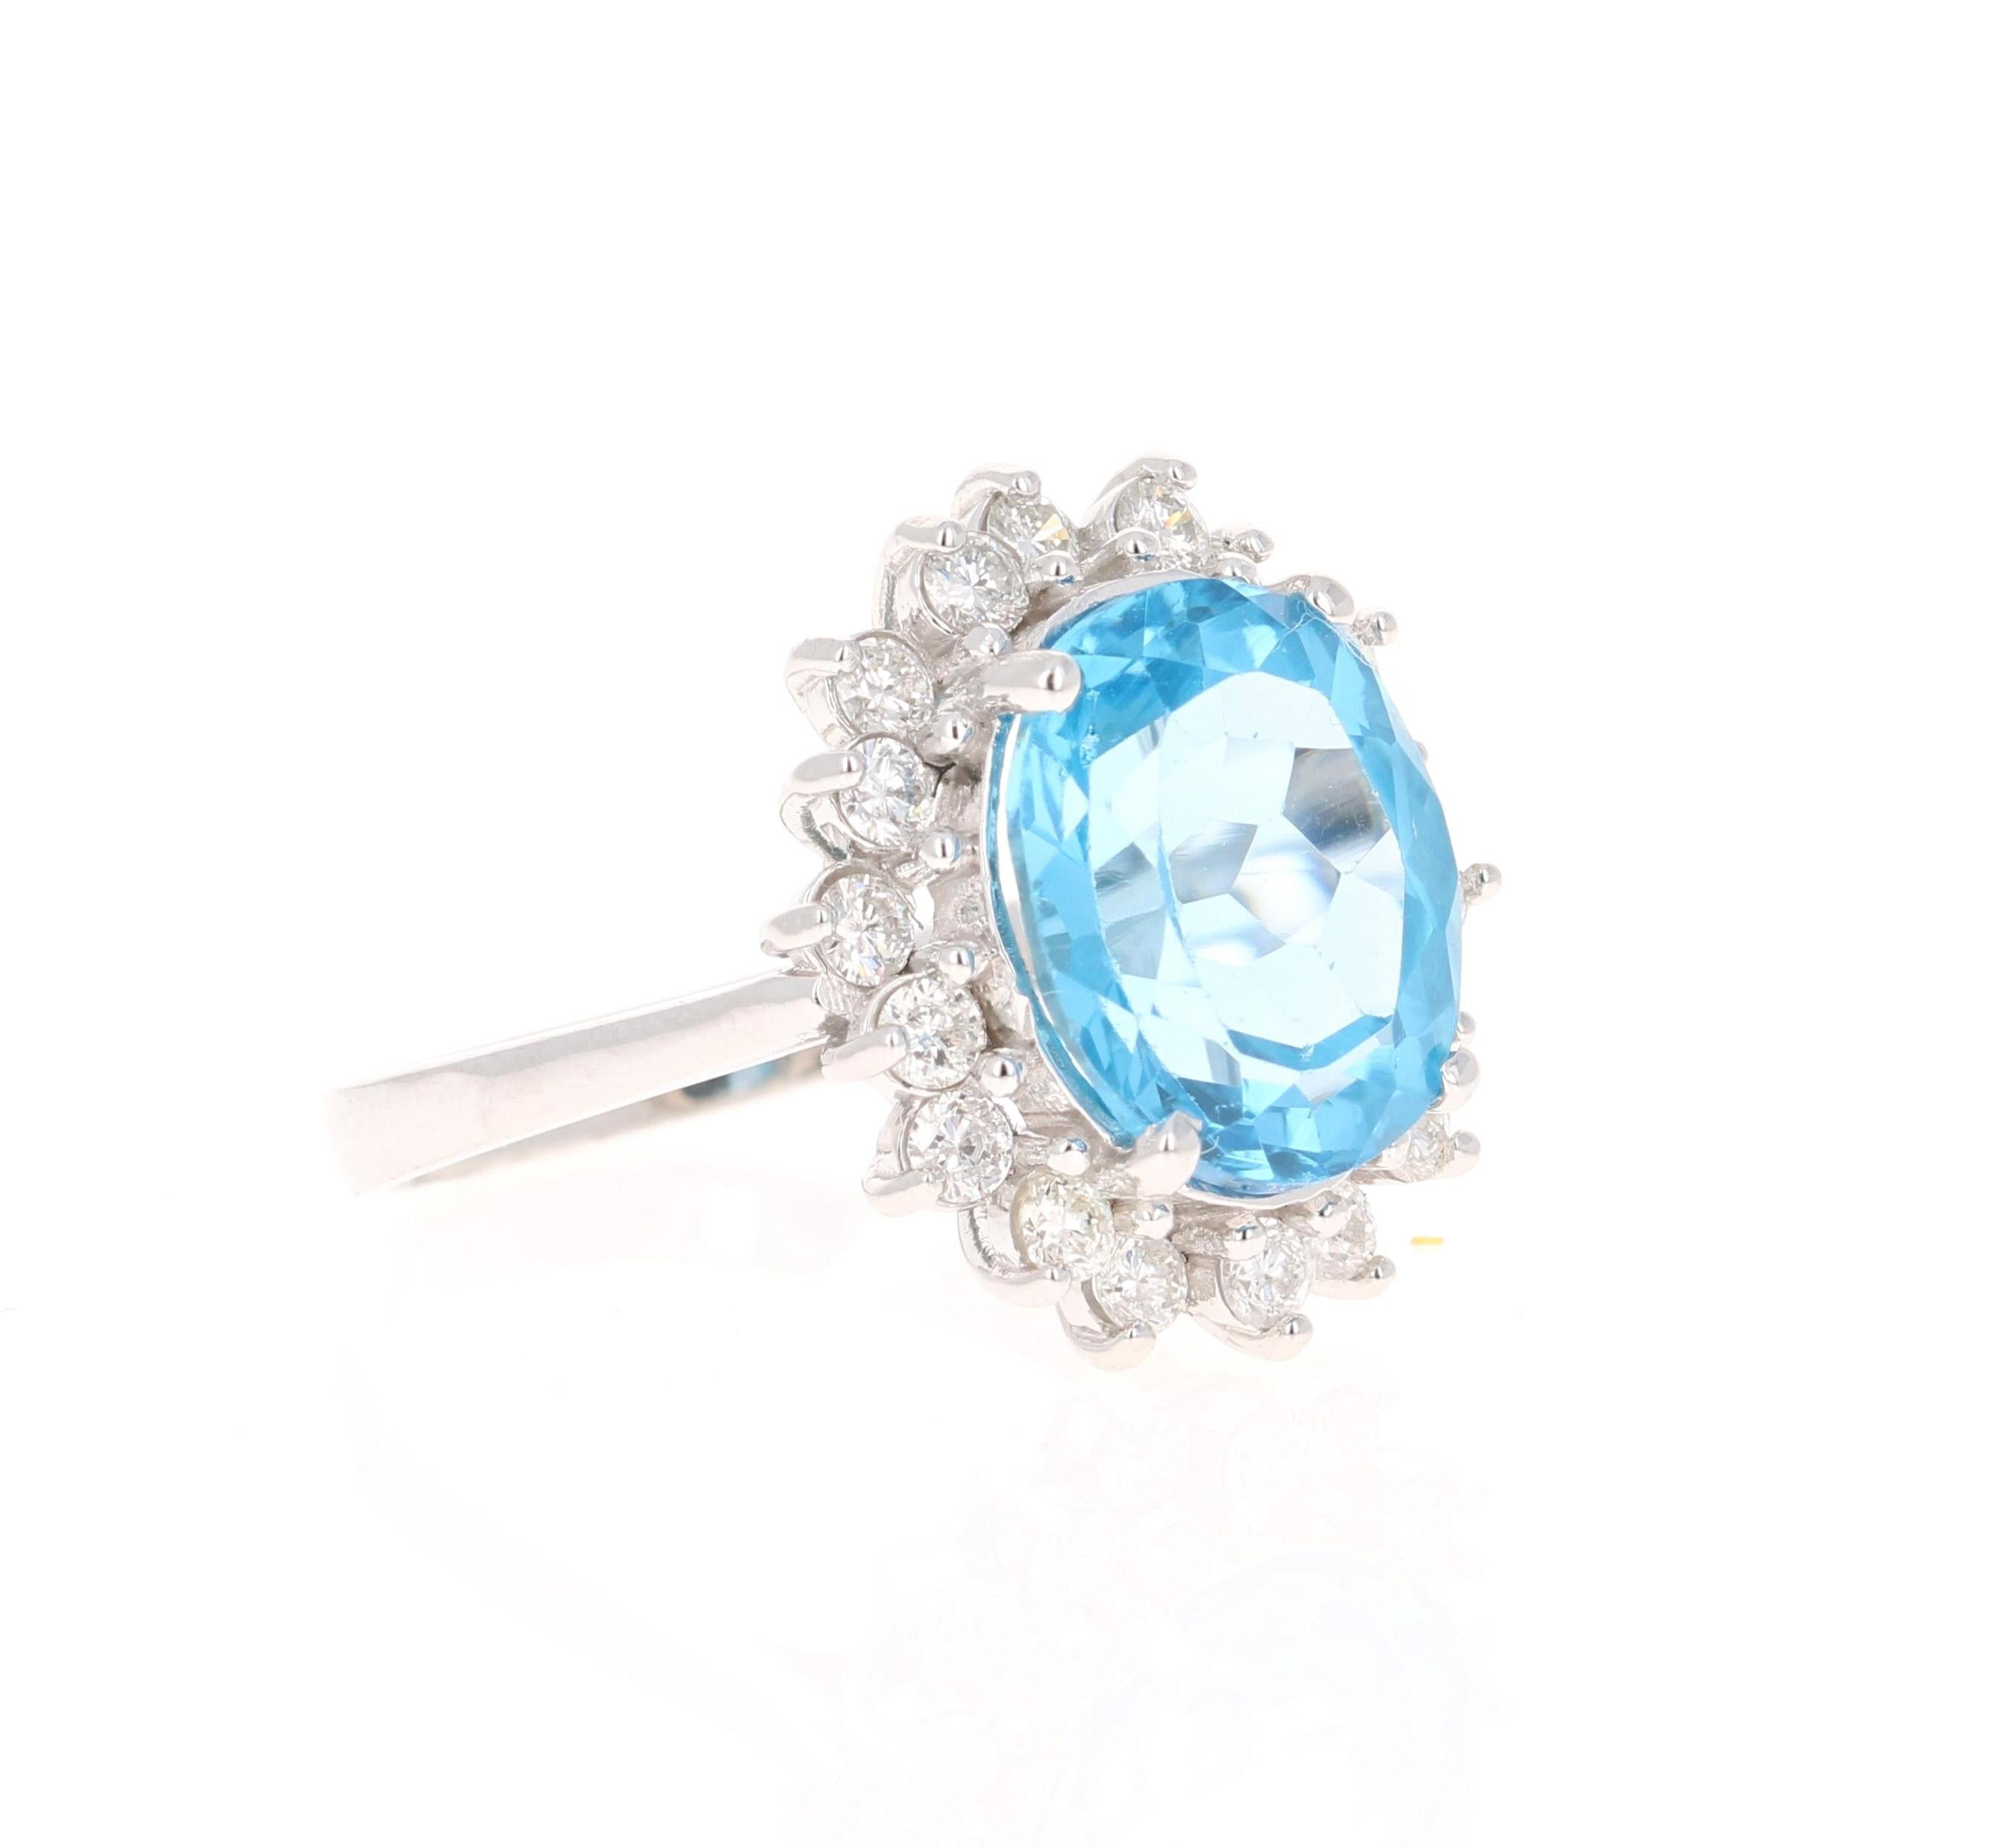 This stunning statement ring has a large Oval Cut Blue Topaz that weighs 6.28 Carats. 
It is surrounded by a simple halo of 18 Round Cut Diamonds that weigh 0.71 Carats. 

It is crafted in 14 Karat White Gold and weighs approximately 4.6 grams.